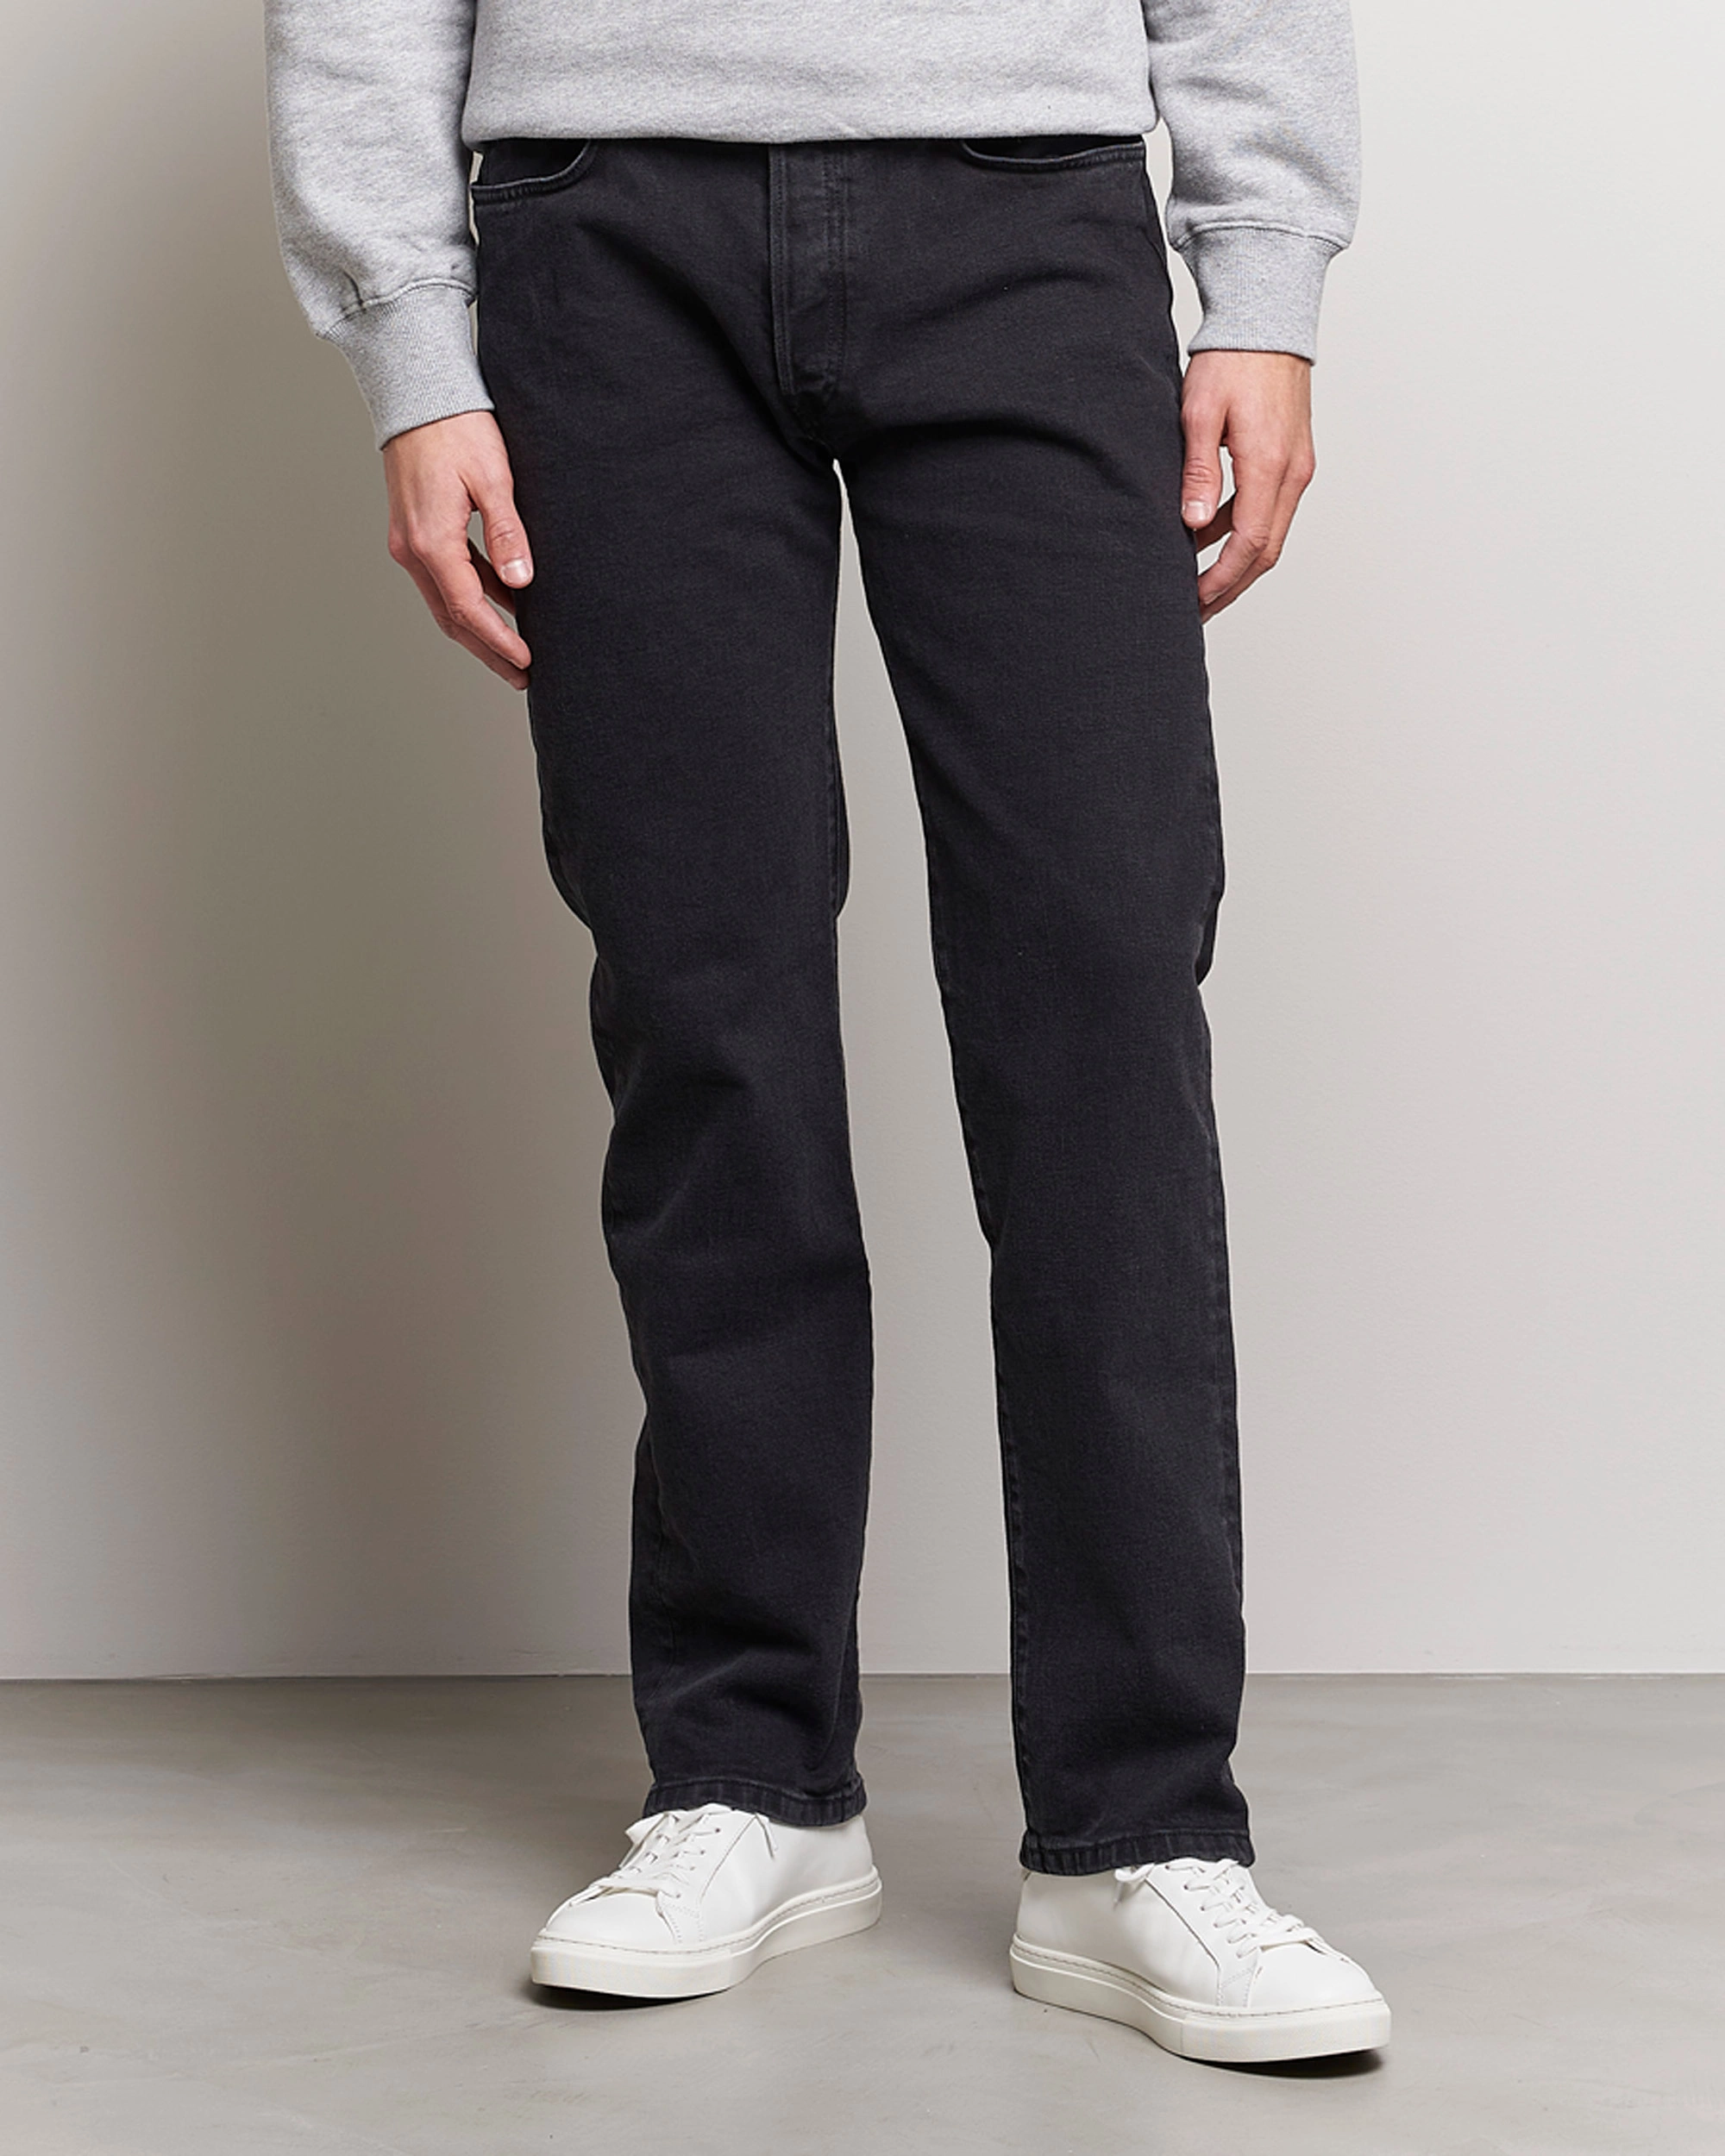 Homme | Jeans Gris | Jeanerica | CM002 Classic Jeans Black 2 Weeks